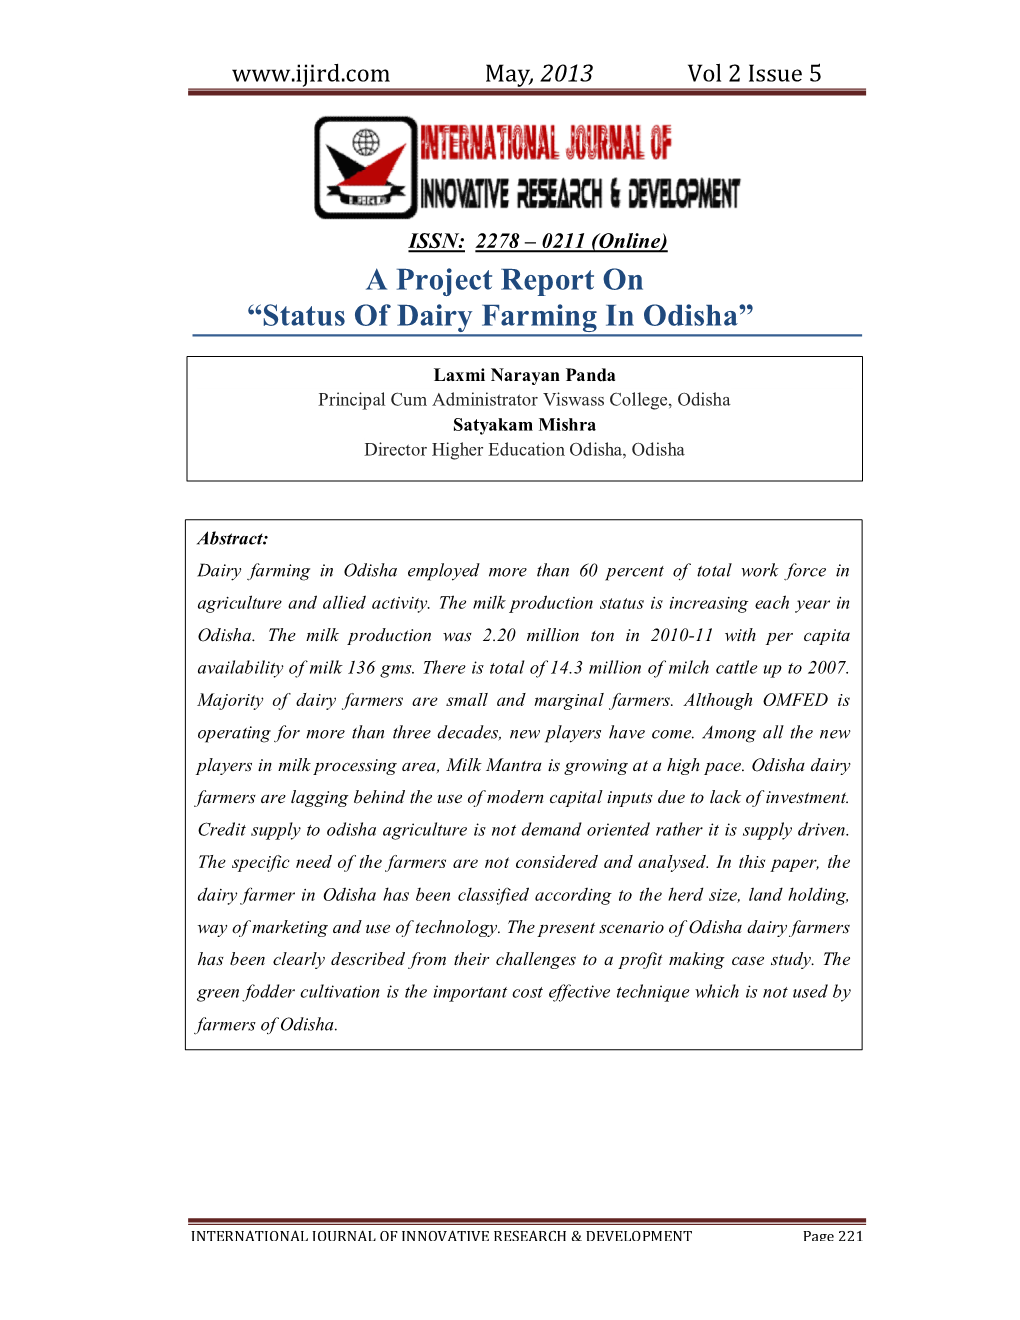 A Project Report on “Status of Dairy Farming in Odisha”